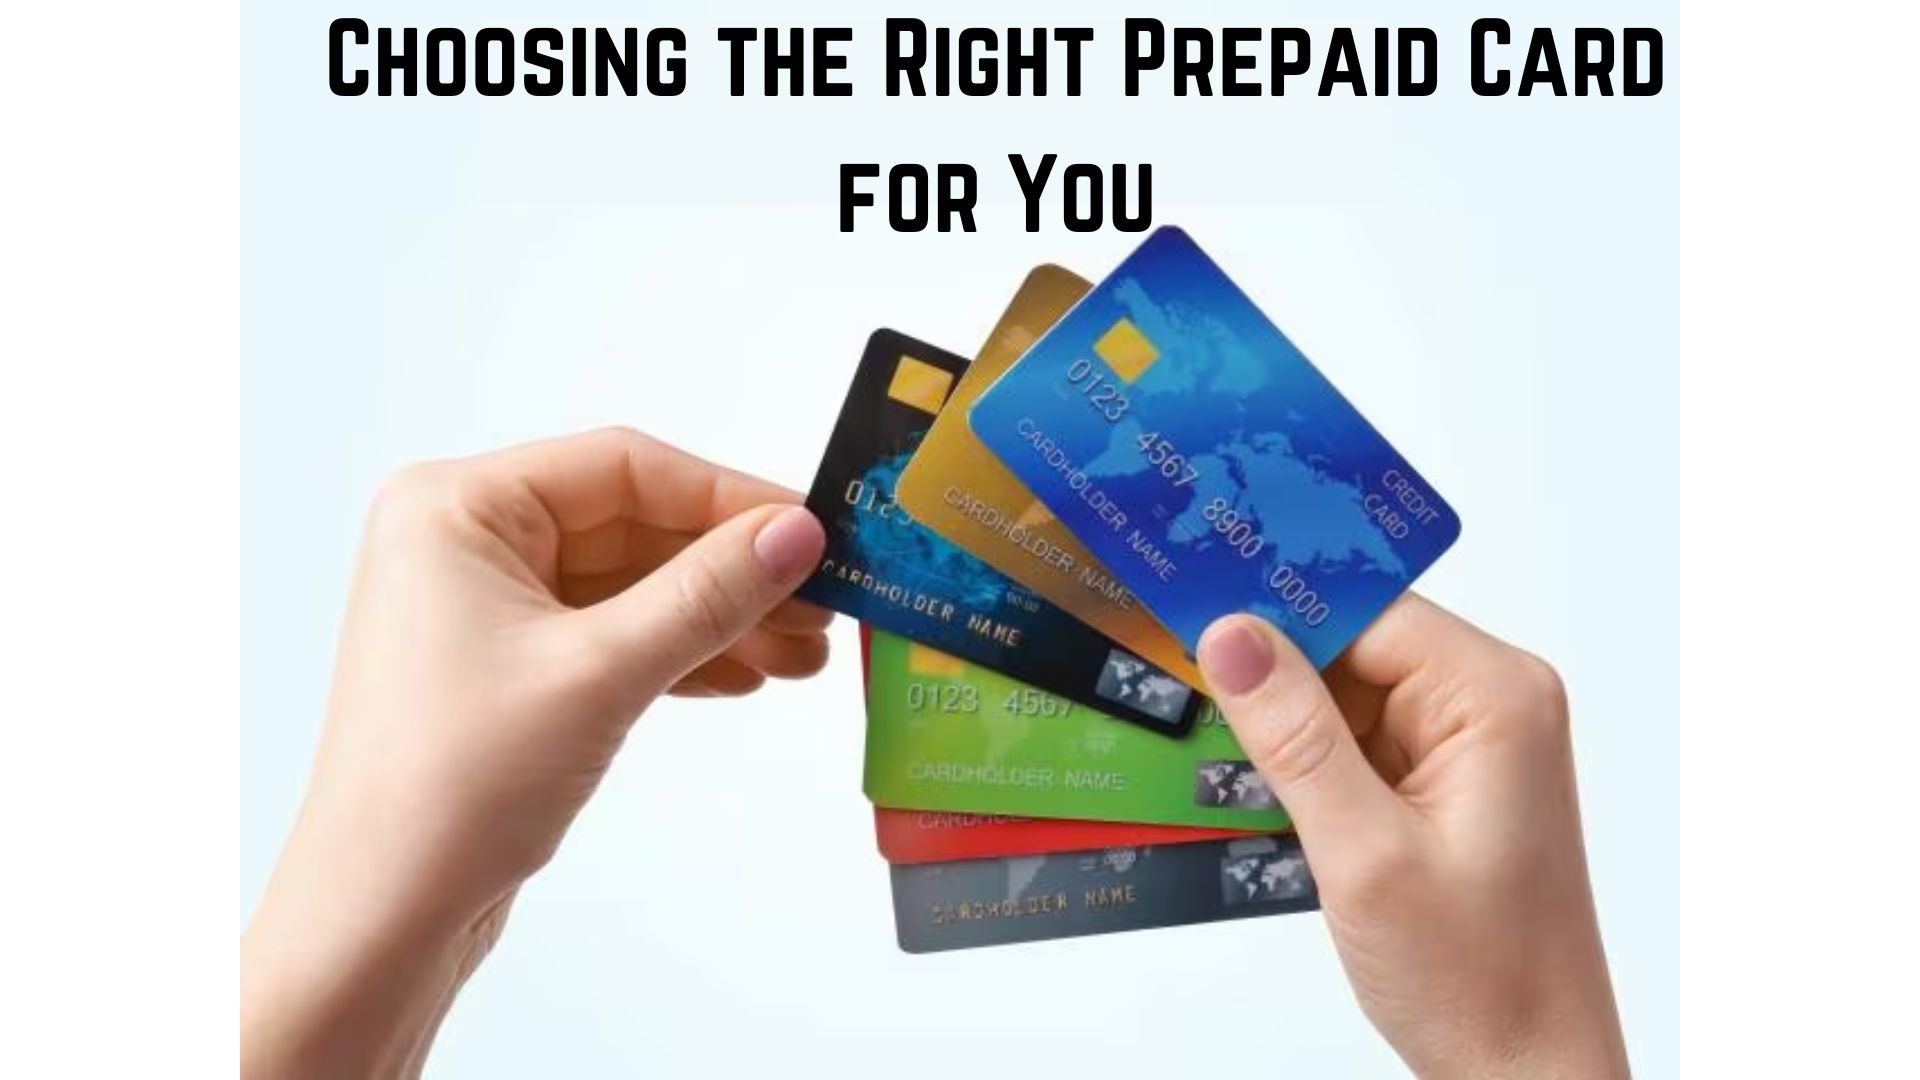 Choosing the Right Prepaid Card for You